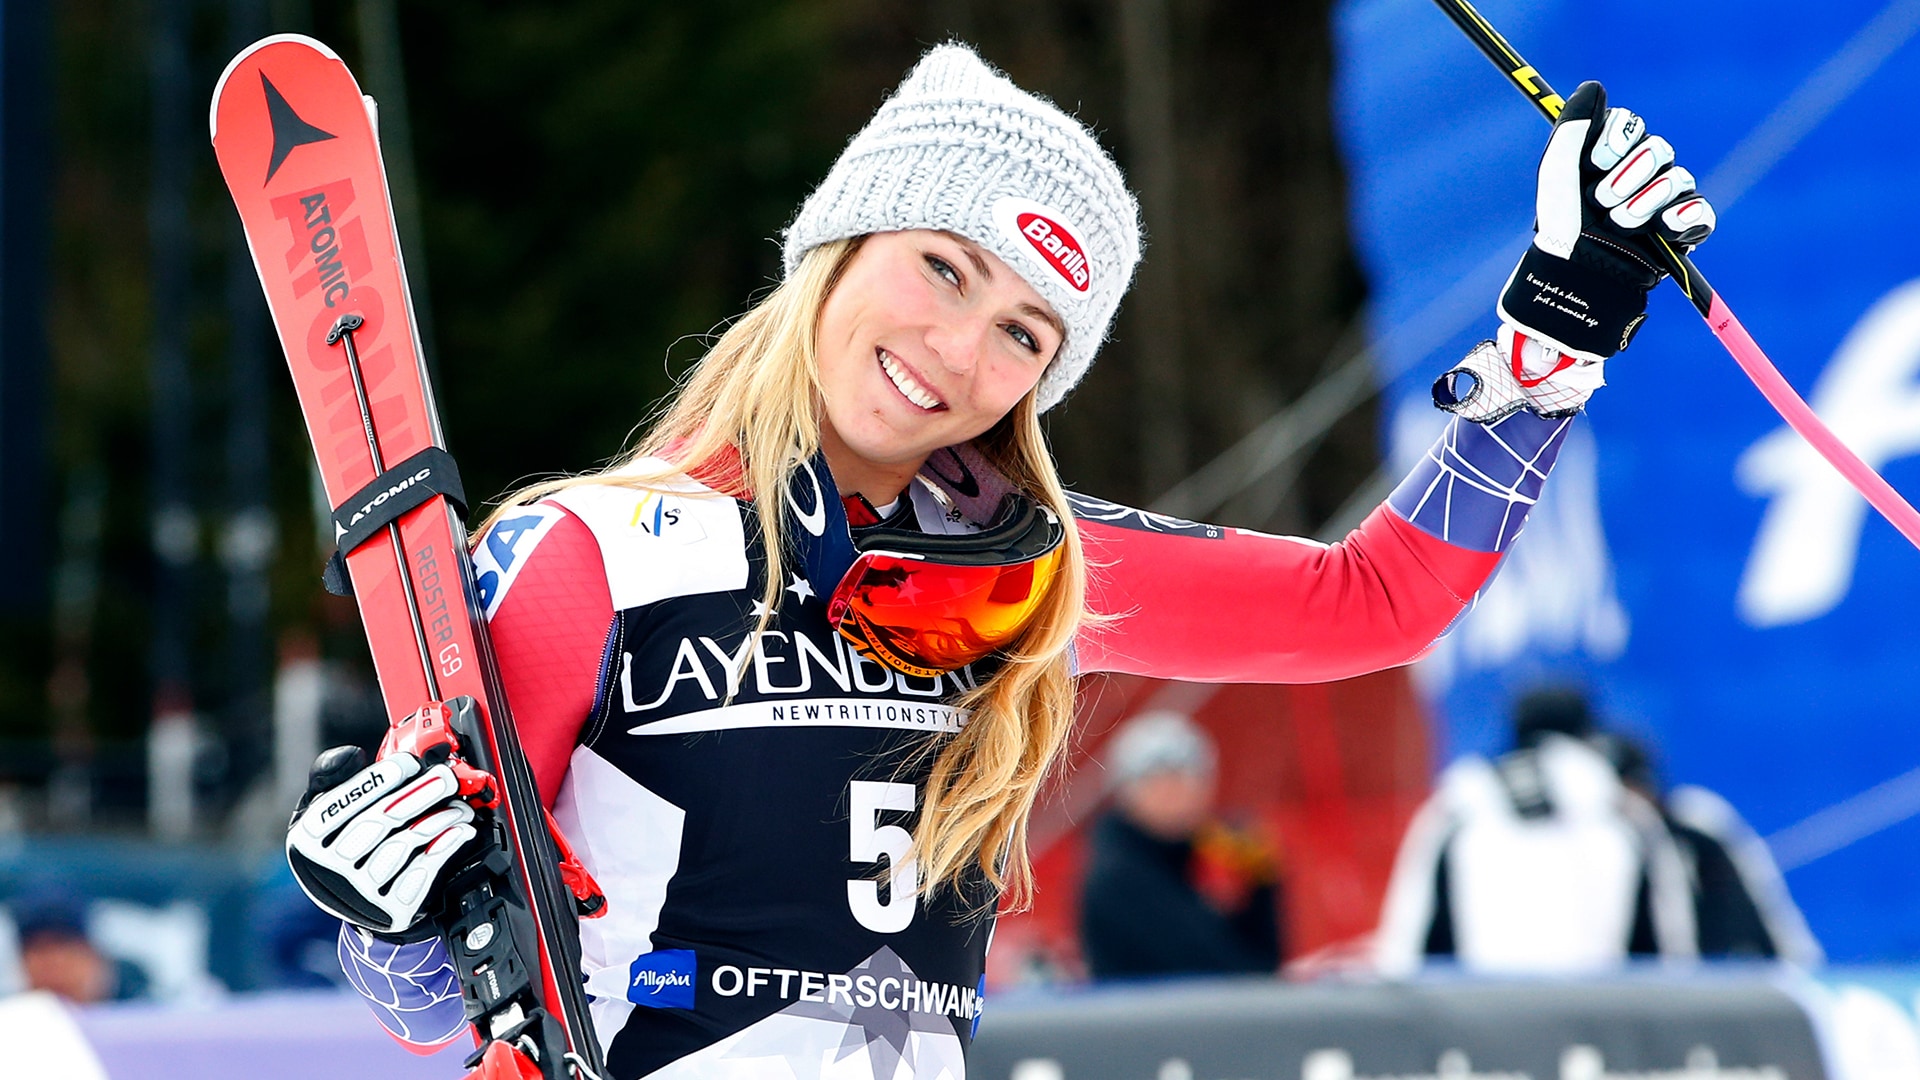 How to watch Mikaela Shiffrin at the 2022 Winter Olympics